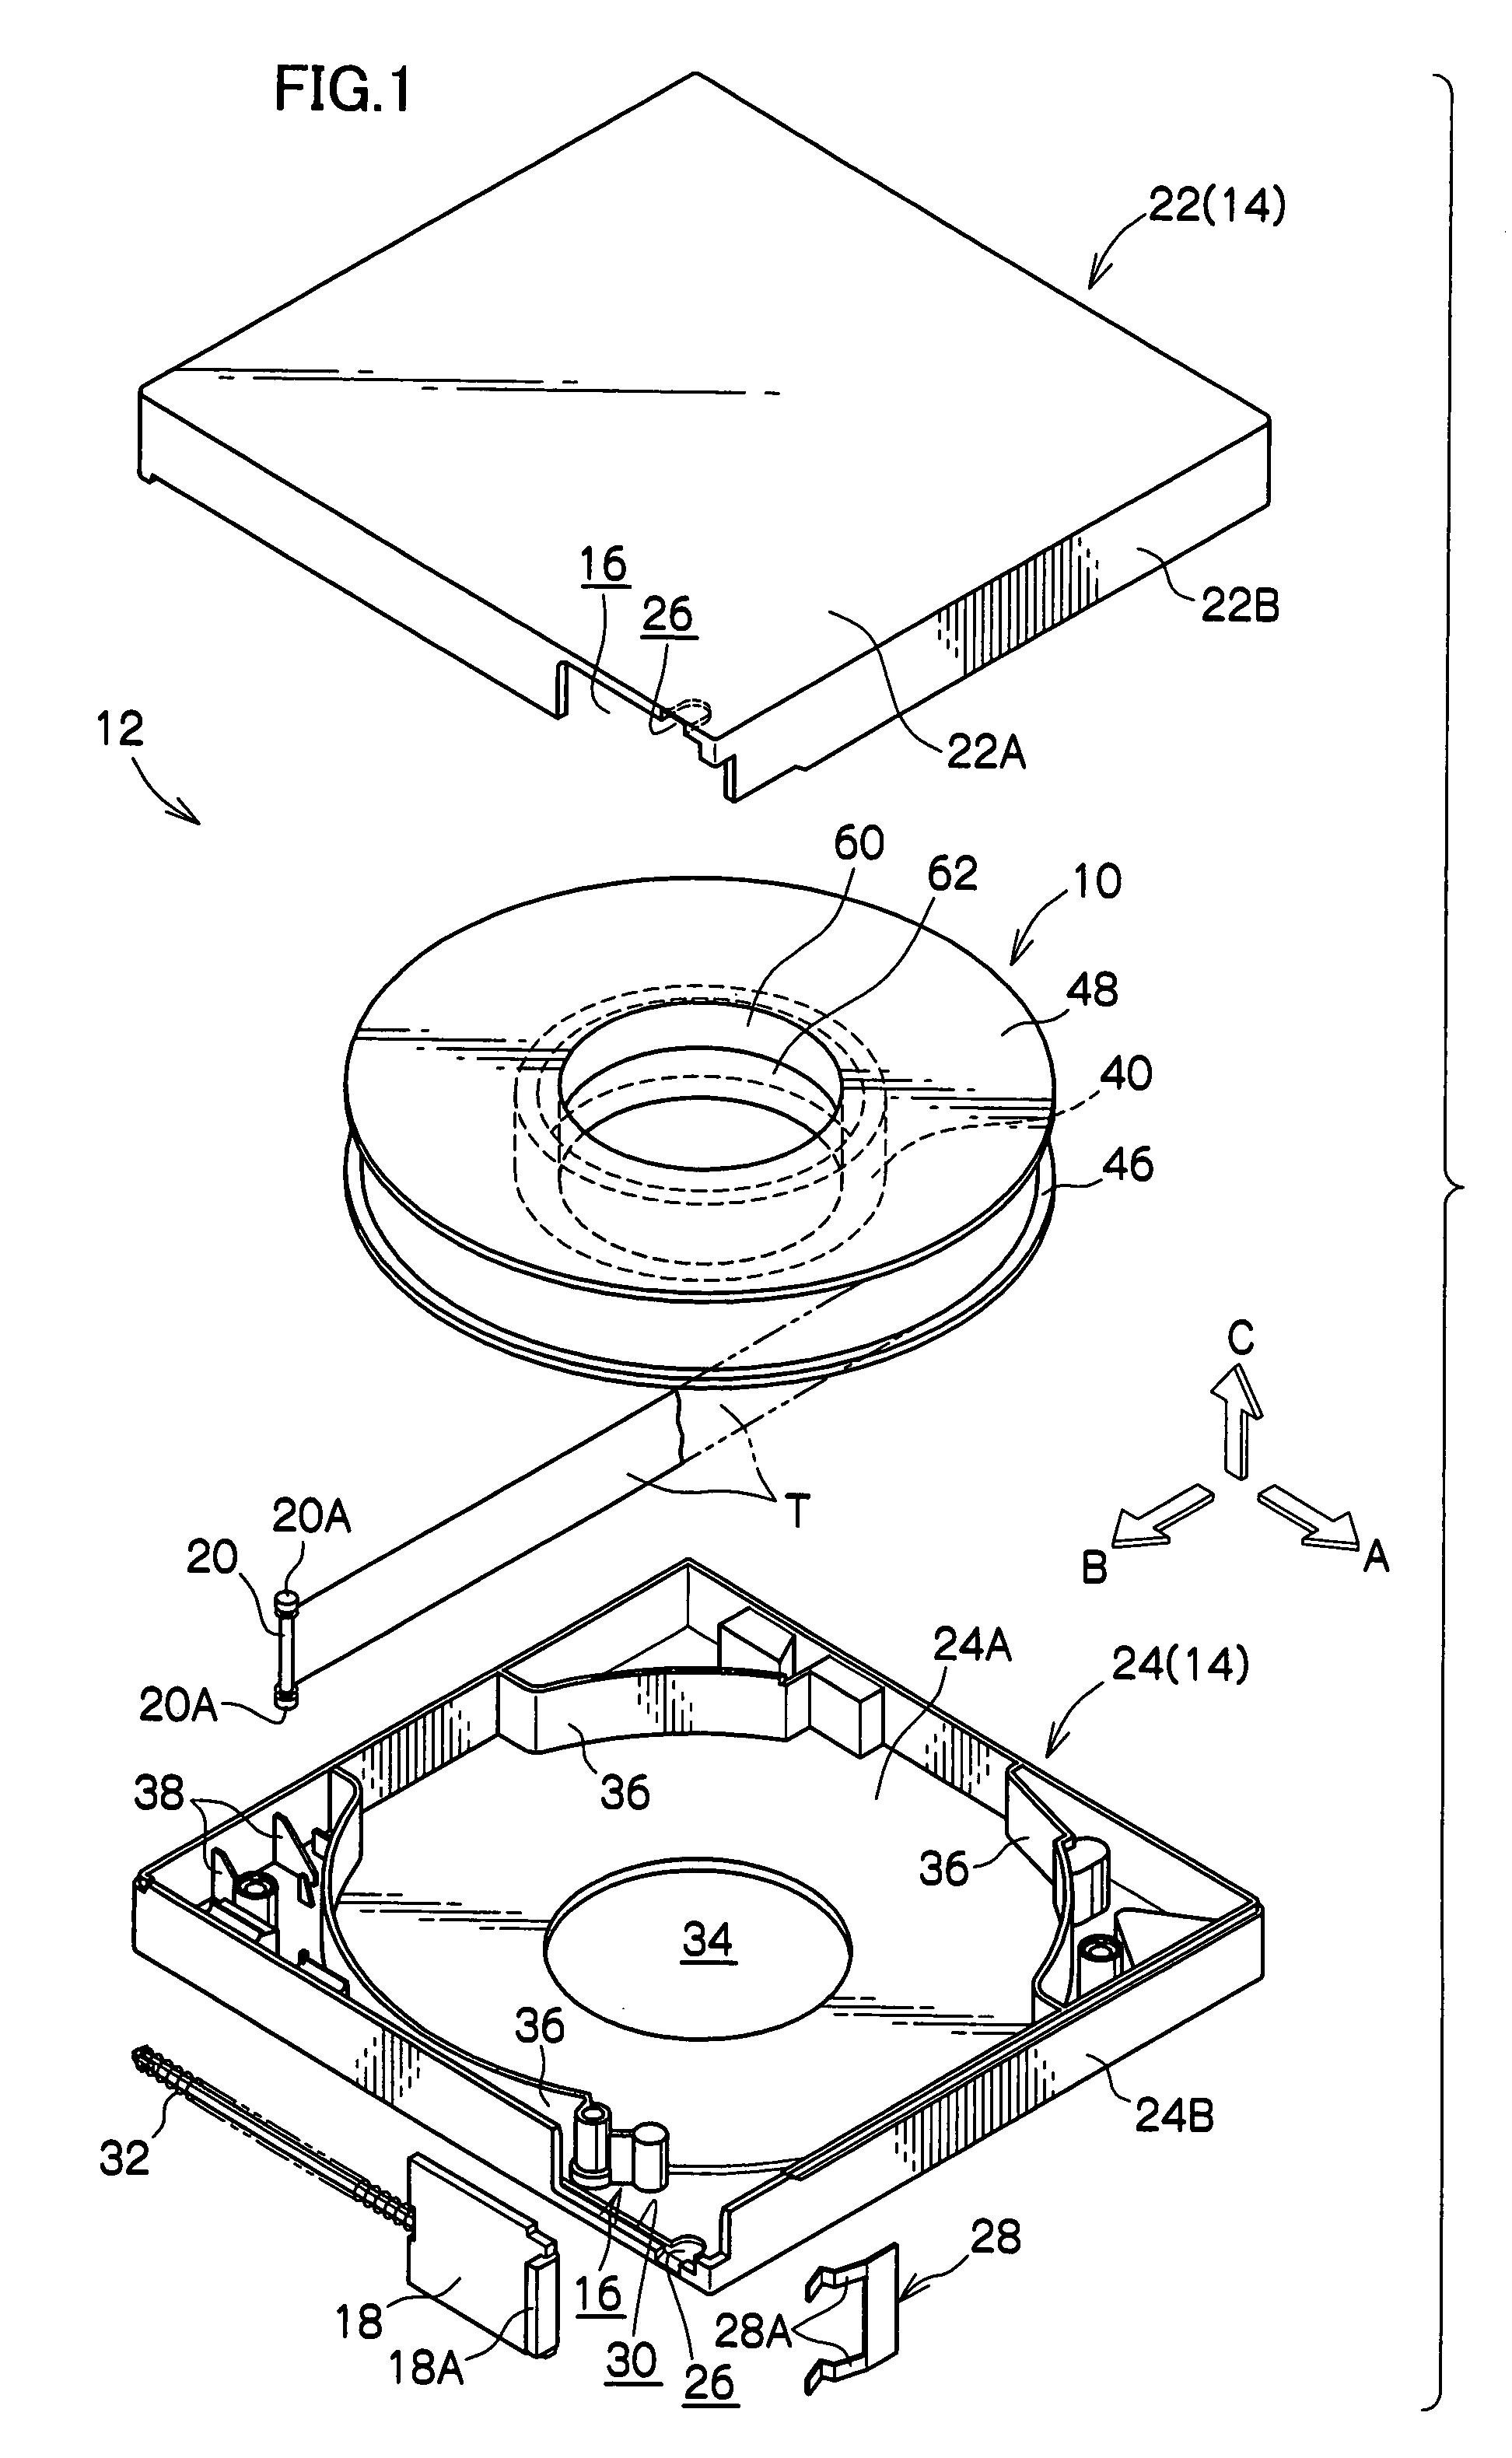 Reel and recording tape cartridge